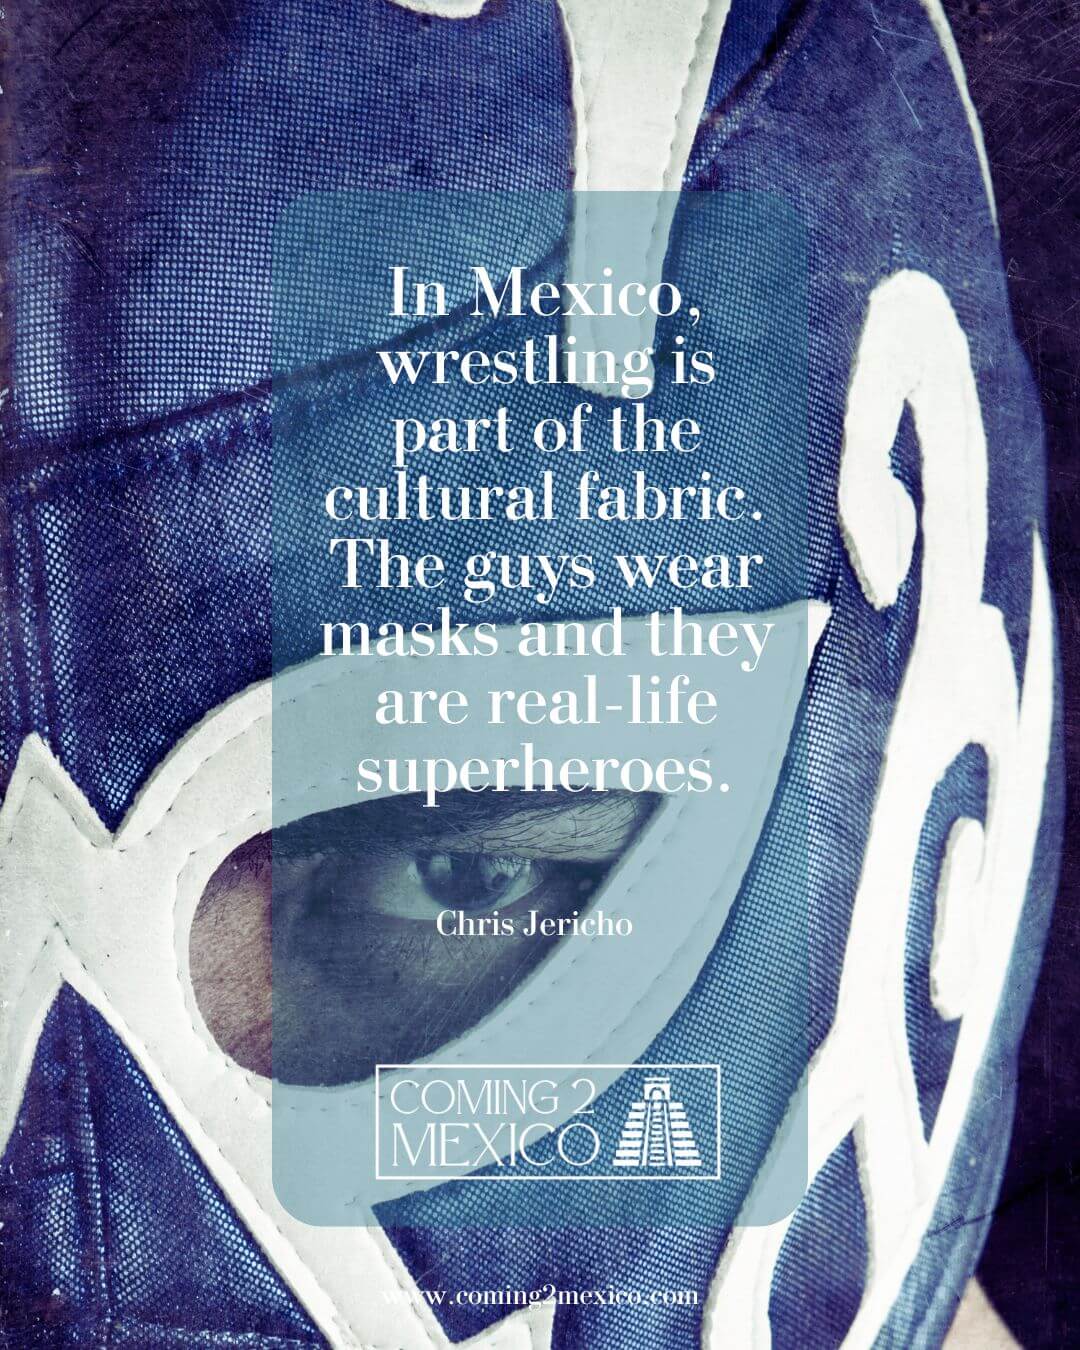 “In Mexico, wrestling is part of the cultural fabric. The guys wear masks and they are real-life superheroes.” – Chris Jericho